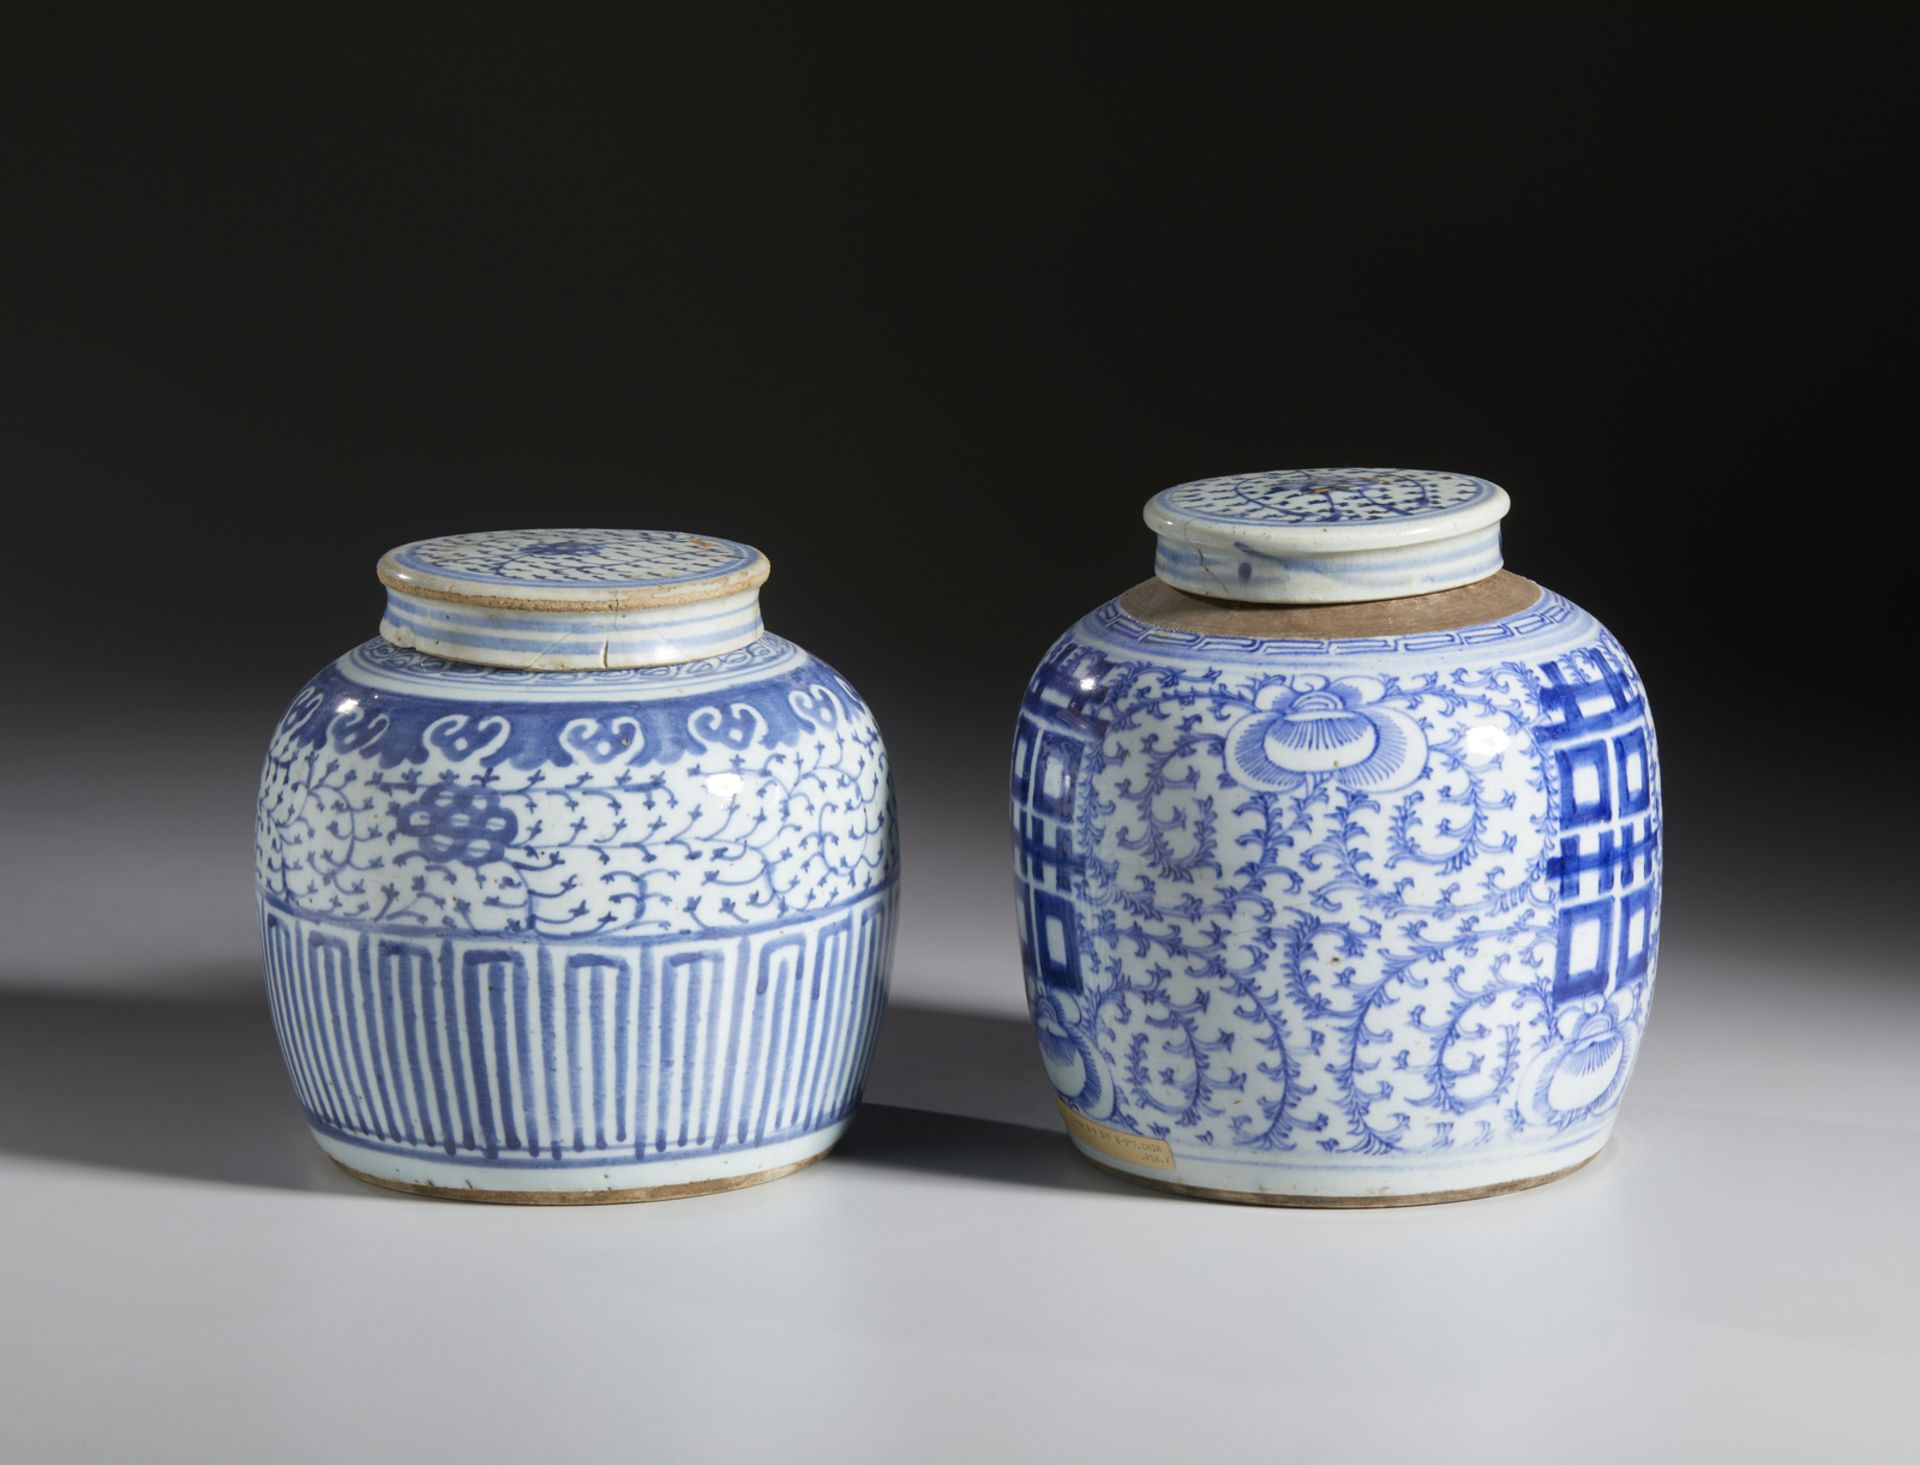 Pair of blue and white porcelain storage jars and covers China, Qing dynasty, 19th century - Image 3 of 5